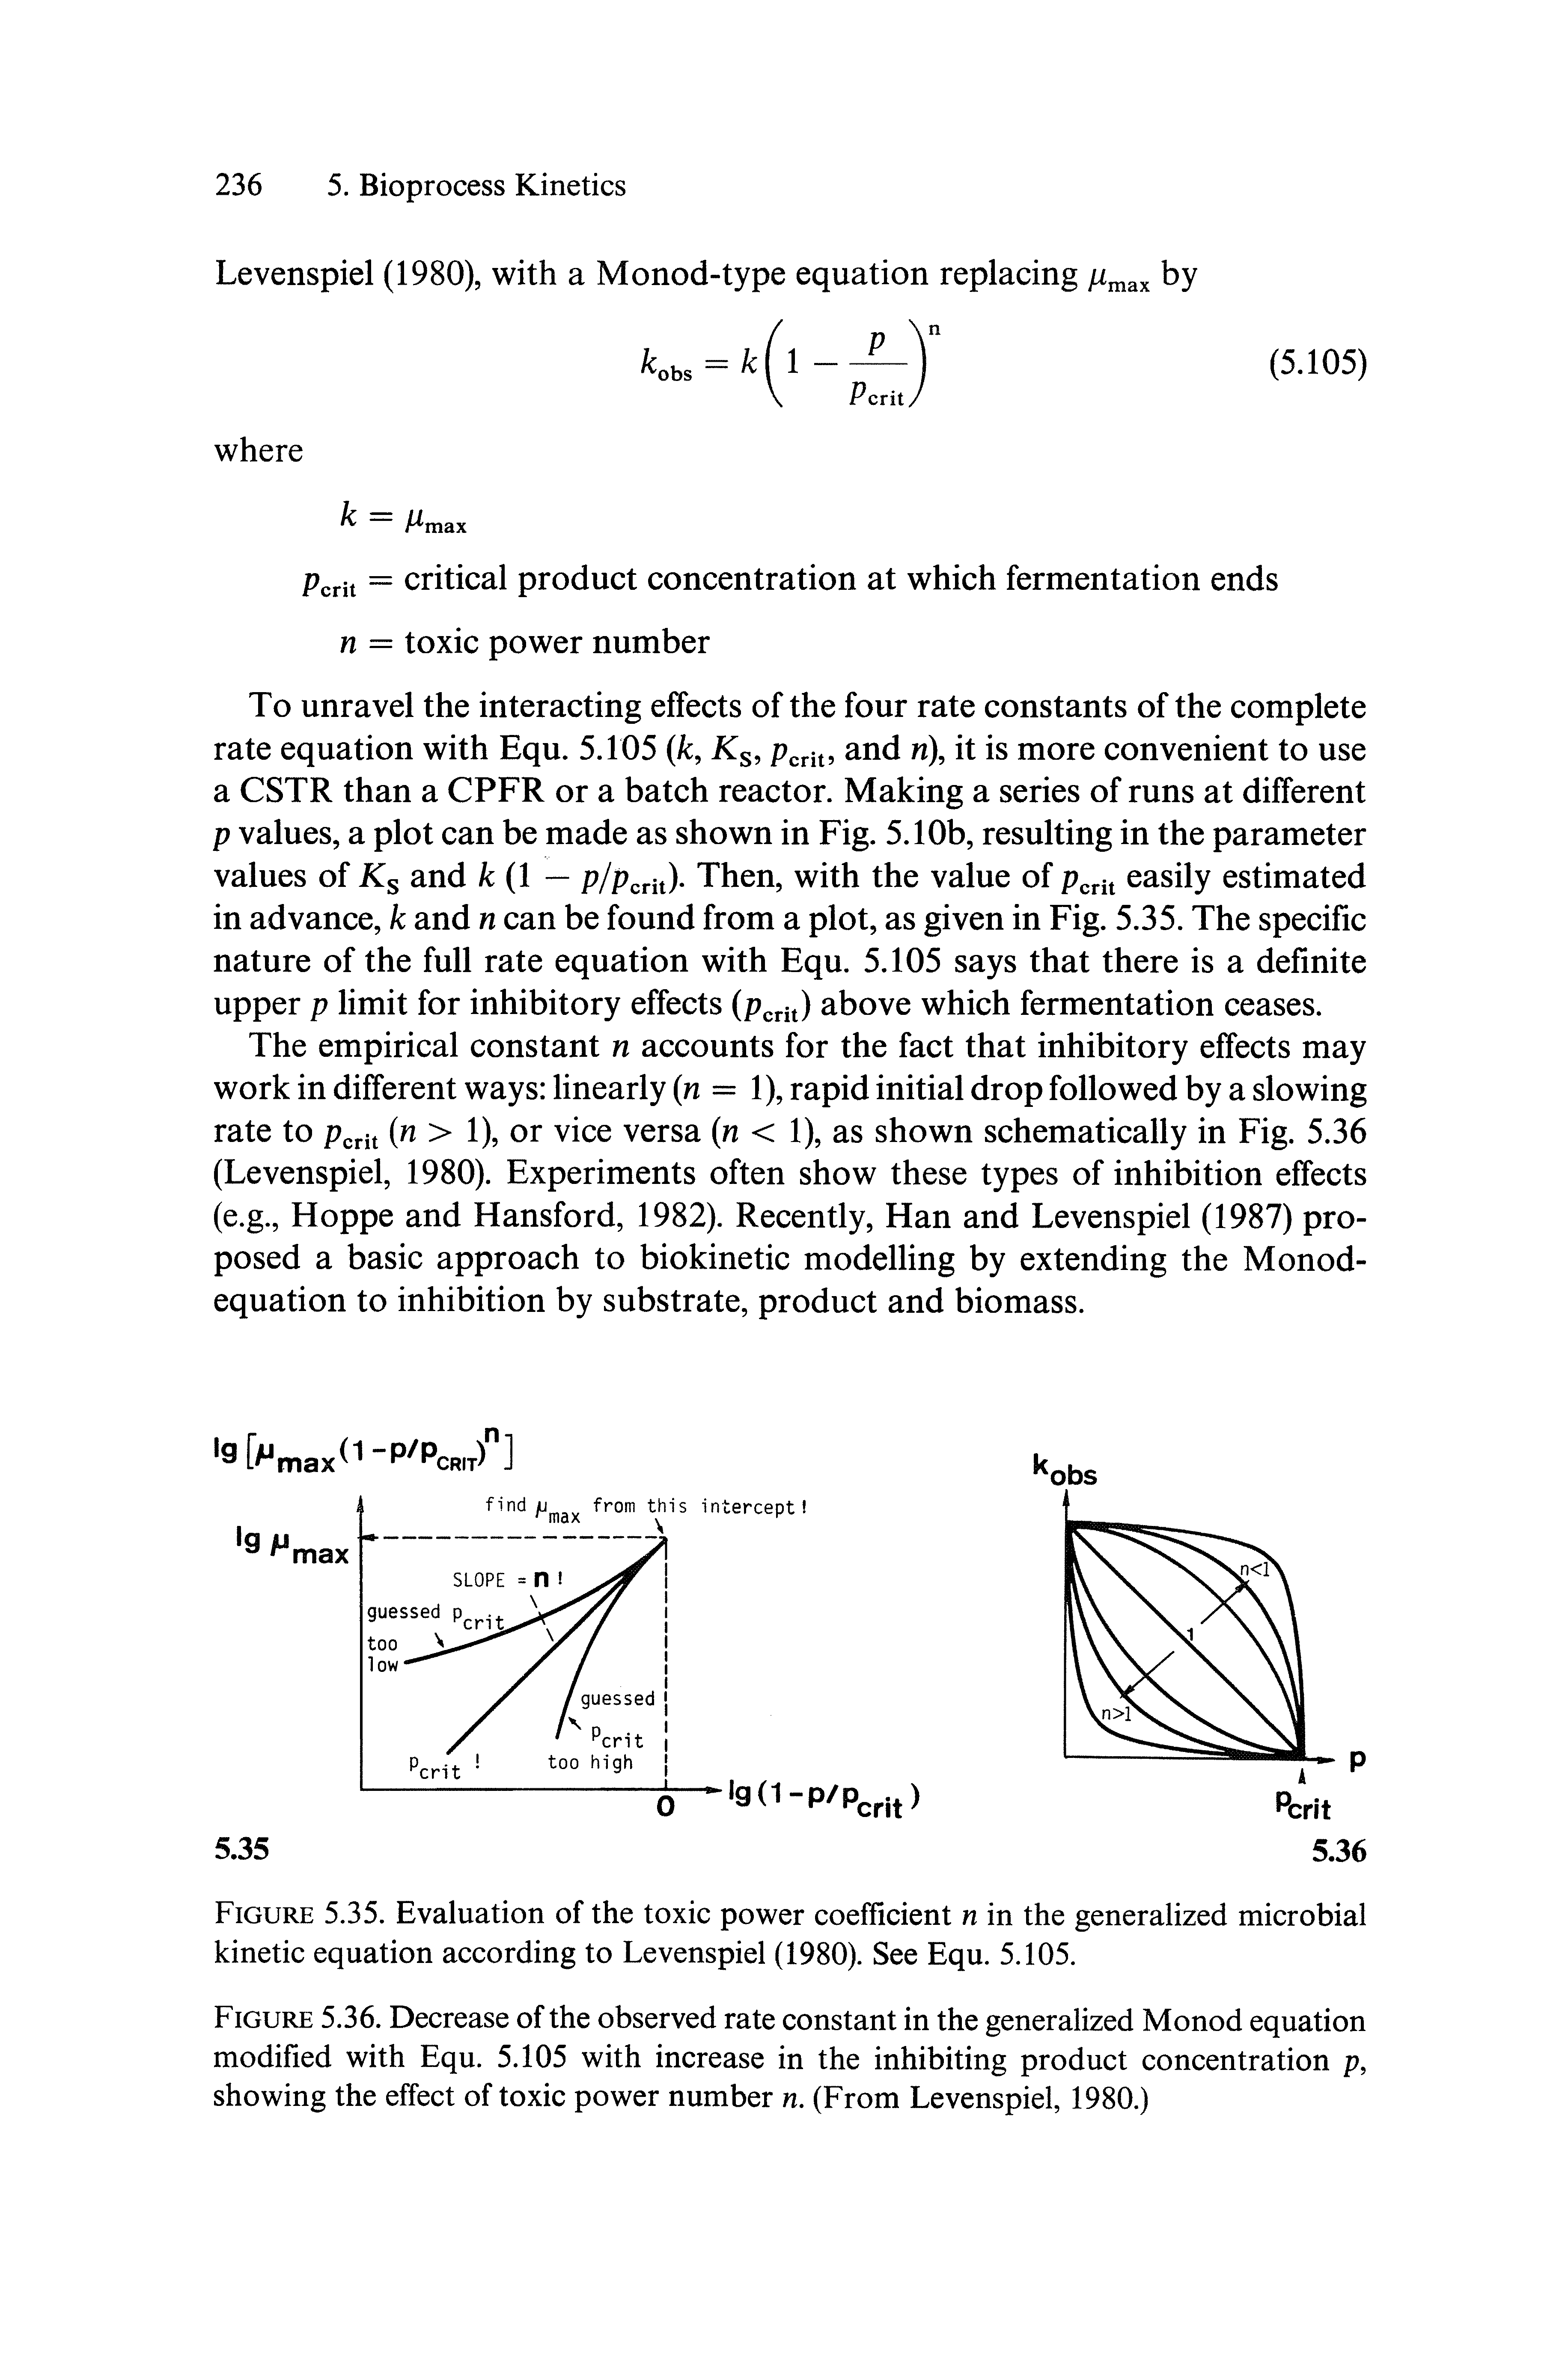 Figure 5.36. Decrease of the observed rate constant in the generalized Monod equation modified with Equ. 5.105 with increase in the inhibiting product concentration p, showing the effect of toxic power number n. (From Levenspiel, 1980.)...